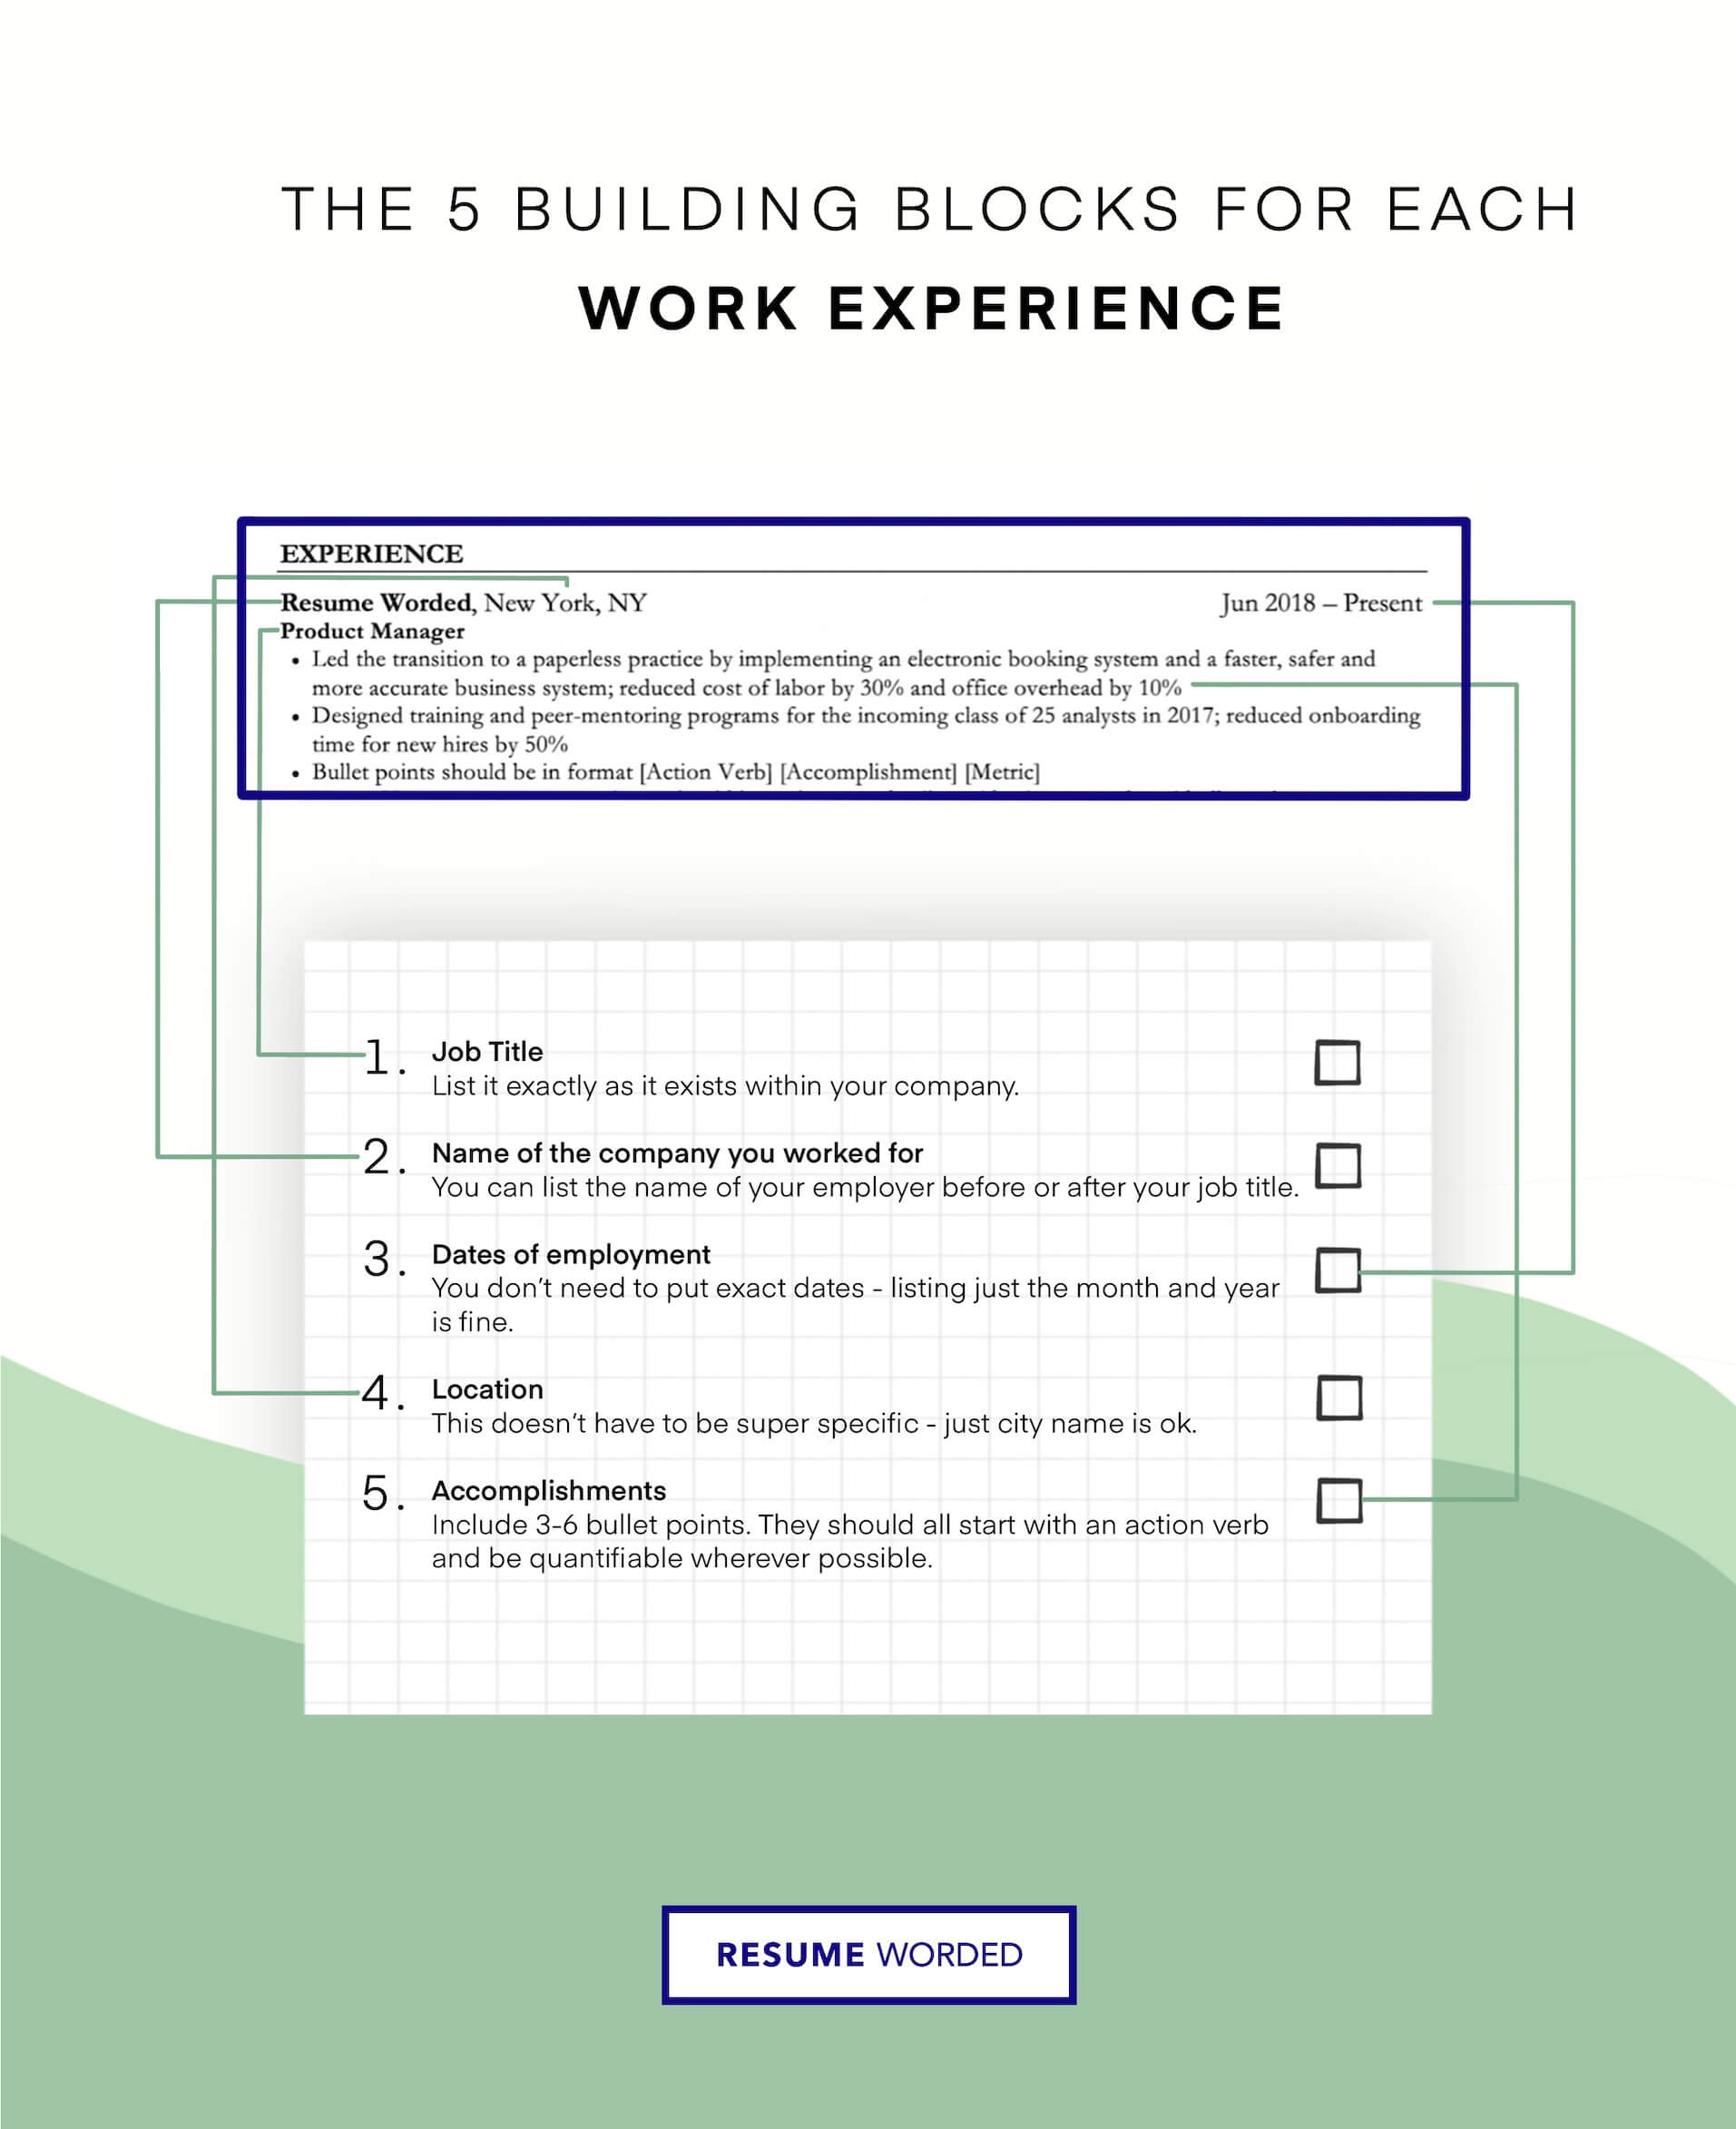 List experience in related industries where you gained transferable skills. - Supply Chain Planner Resume